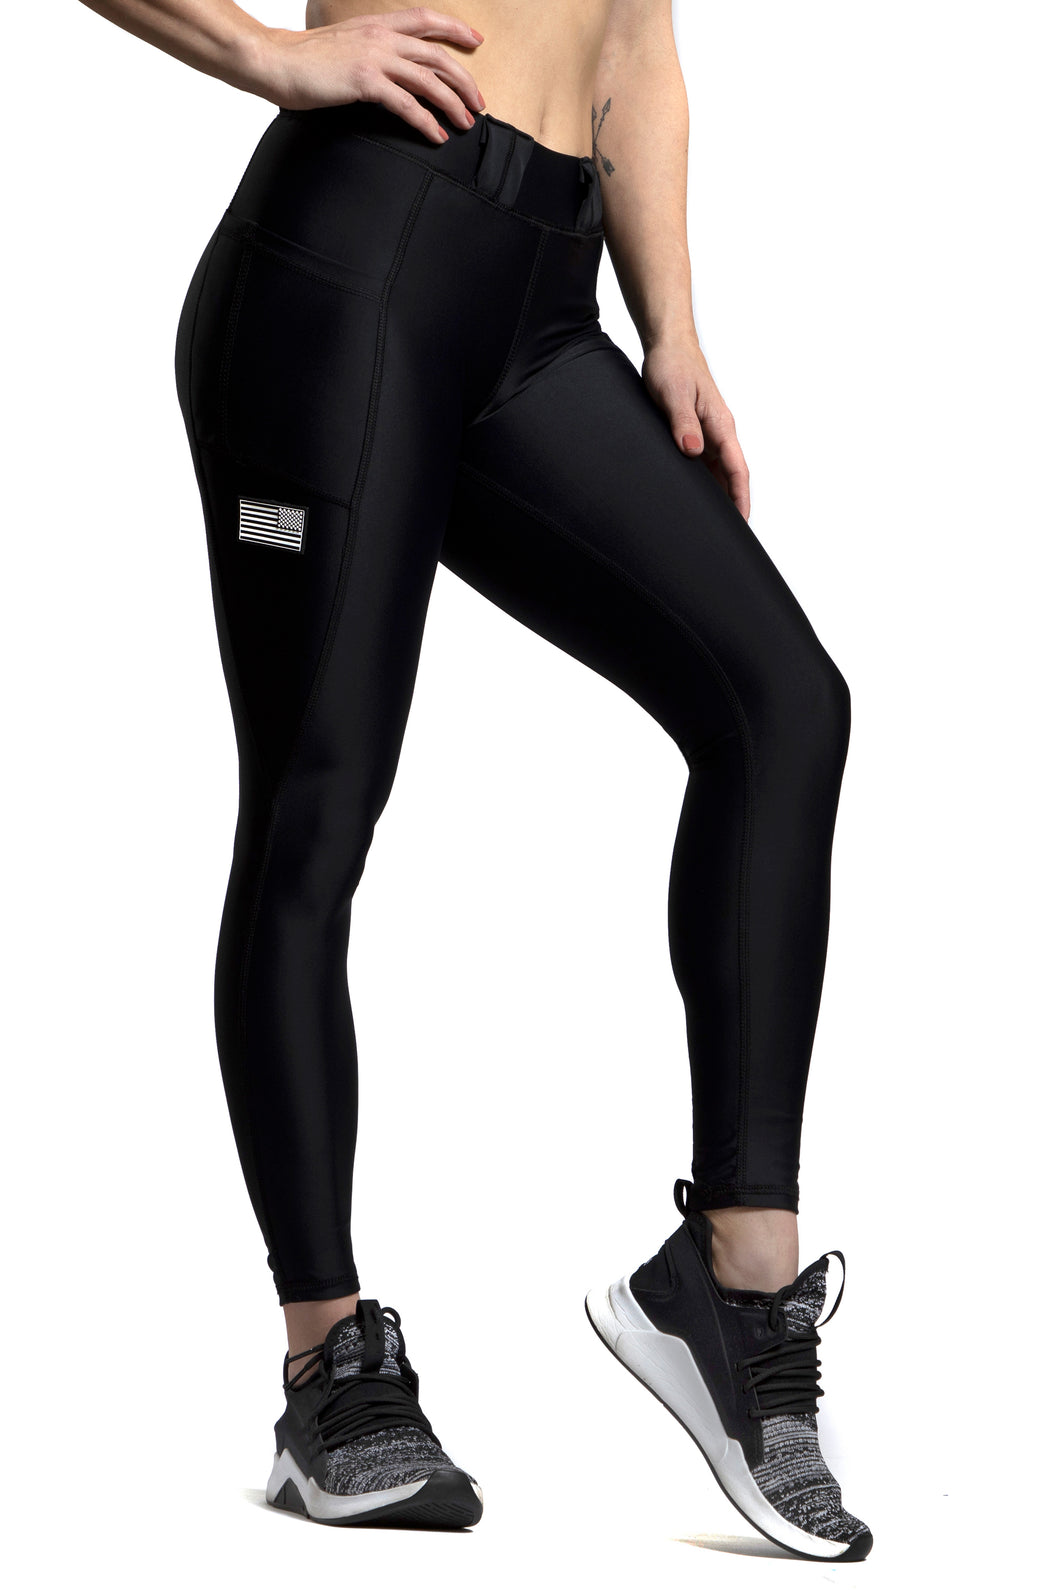 We The People Holsters - Defender Workout Capris with Pockets - High  Waisted Yoga Pants for Women - Black - XS at  Women's Clothing store